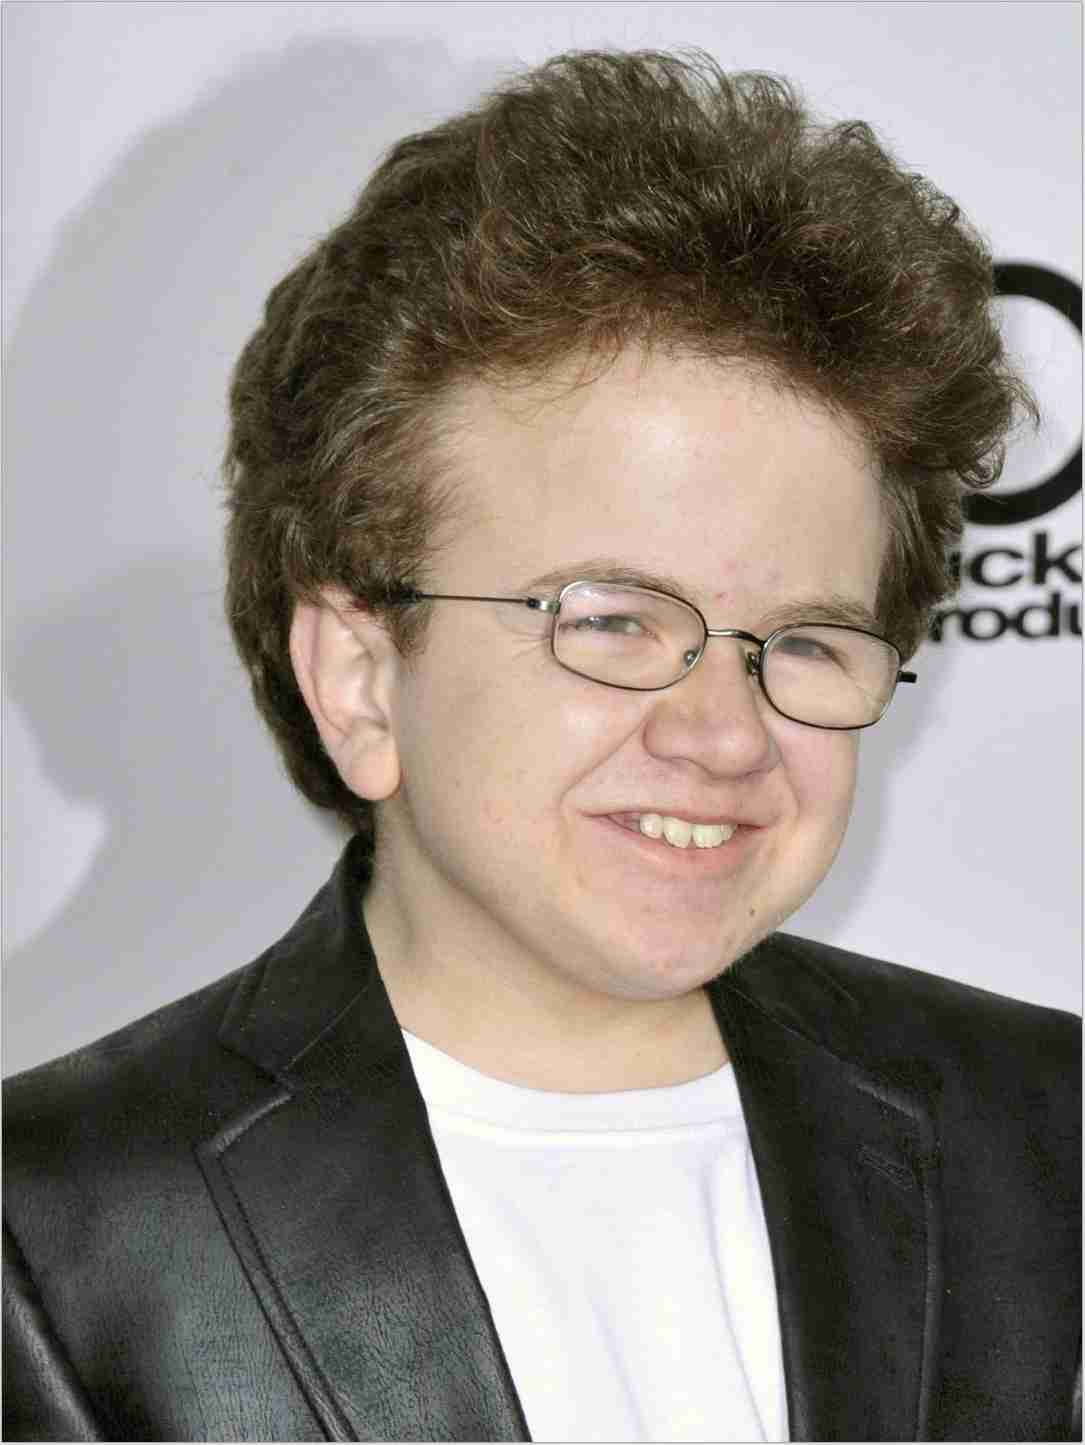 We shared the updated 2020 net worth details of Keenan Cahill such as month...